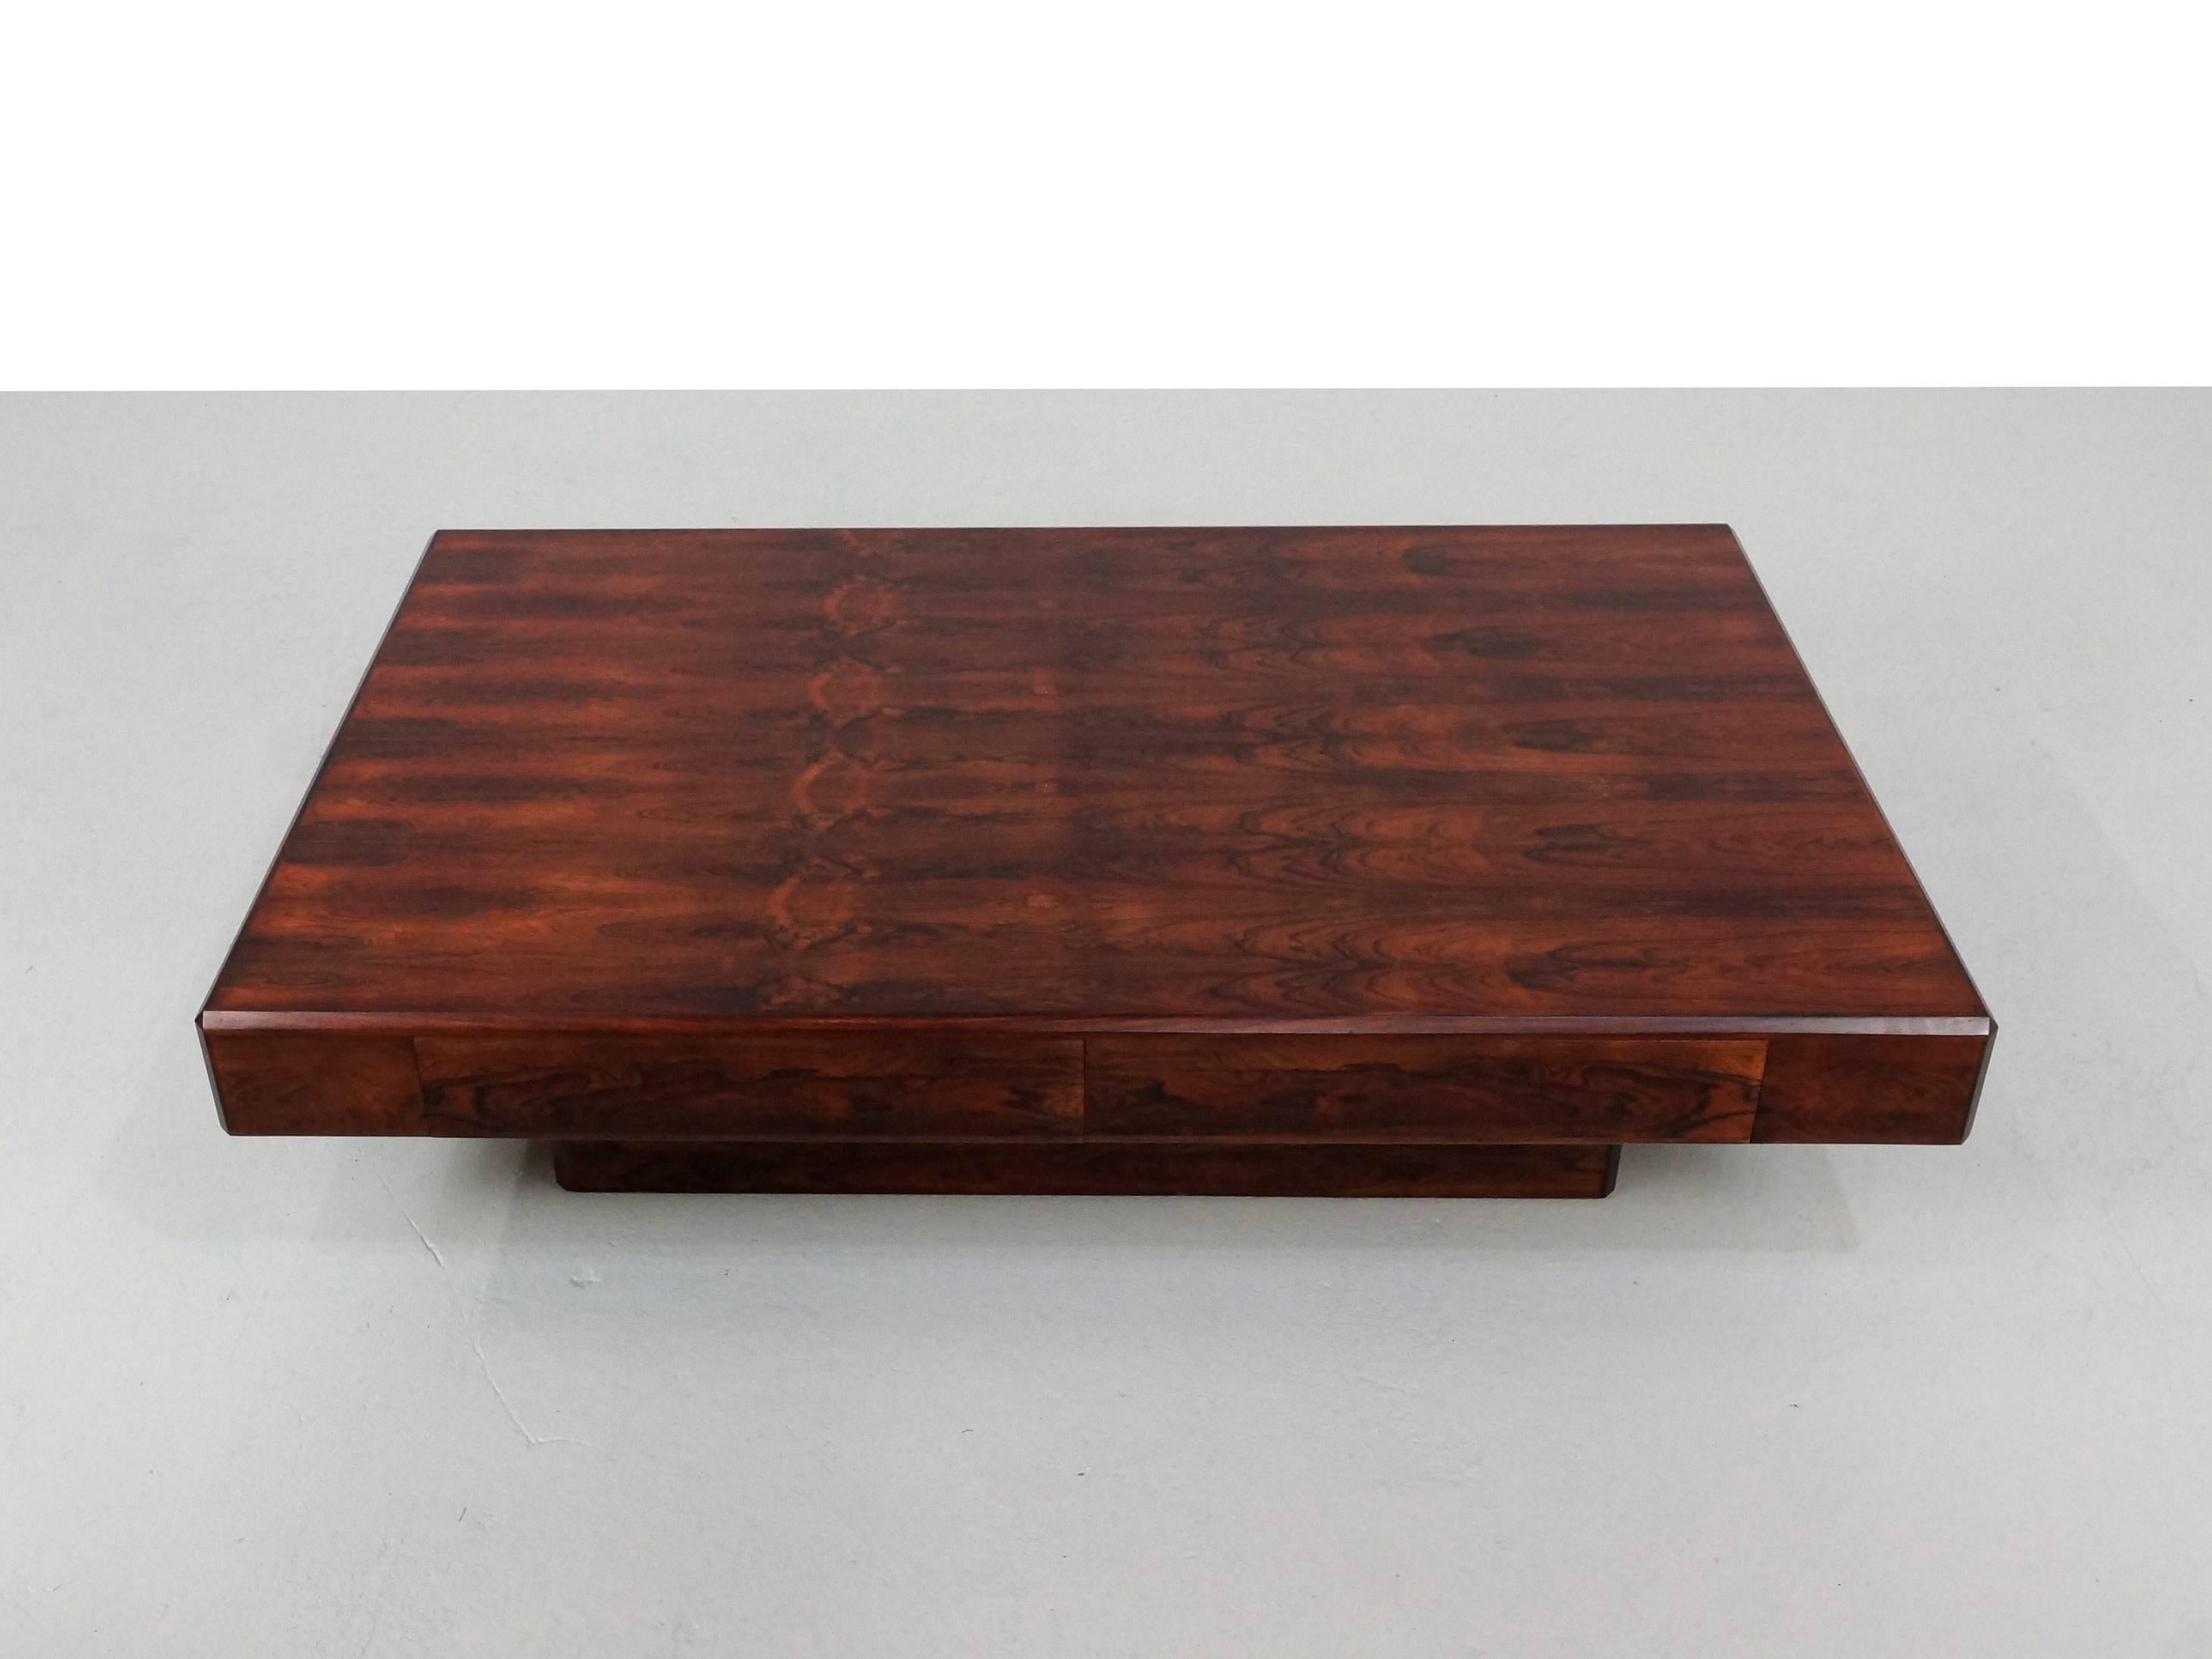 Low coffee table in high quality Rio Rosewood designed by Howard Keith for HK Furniture in the 1980s. The table stands on a pedestal base and has two blind drawers. This table is also known as the 